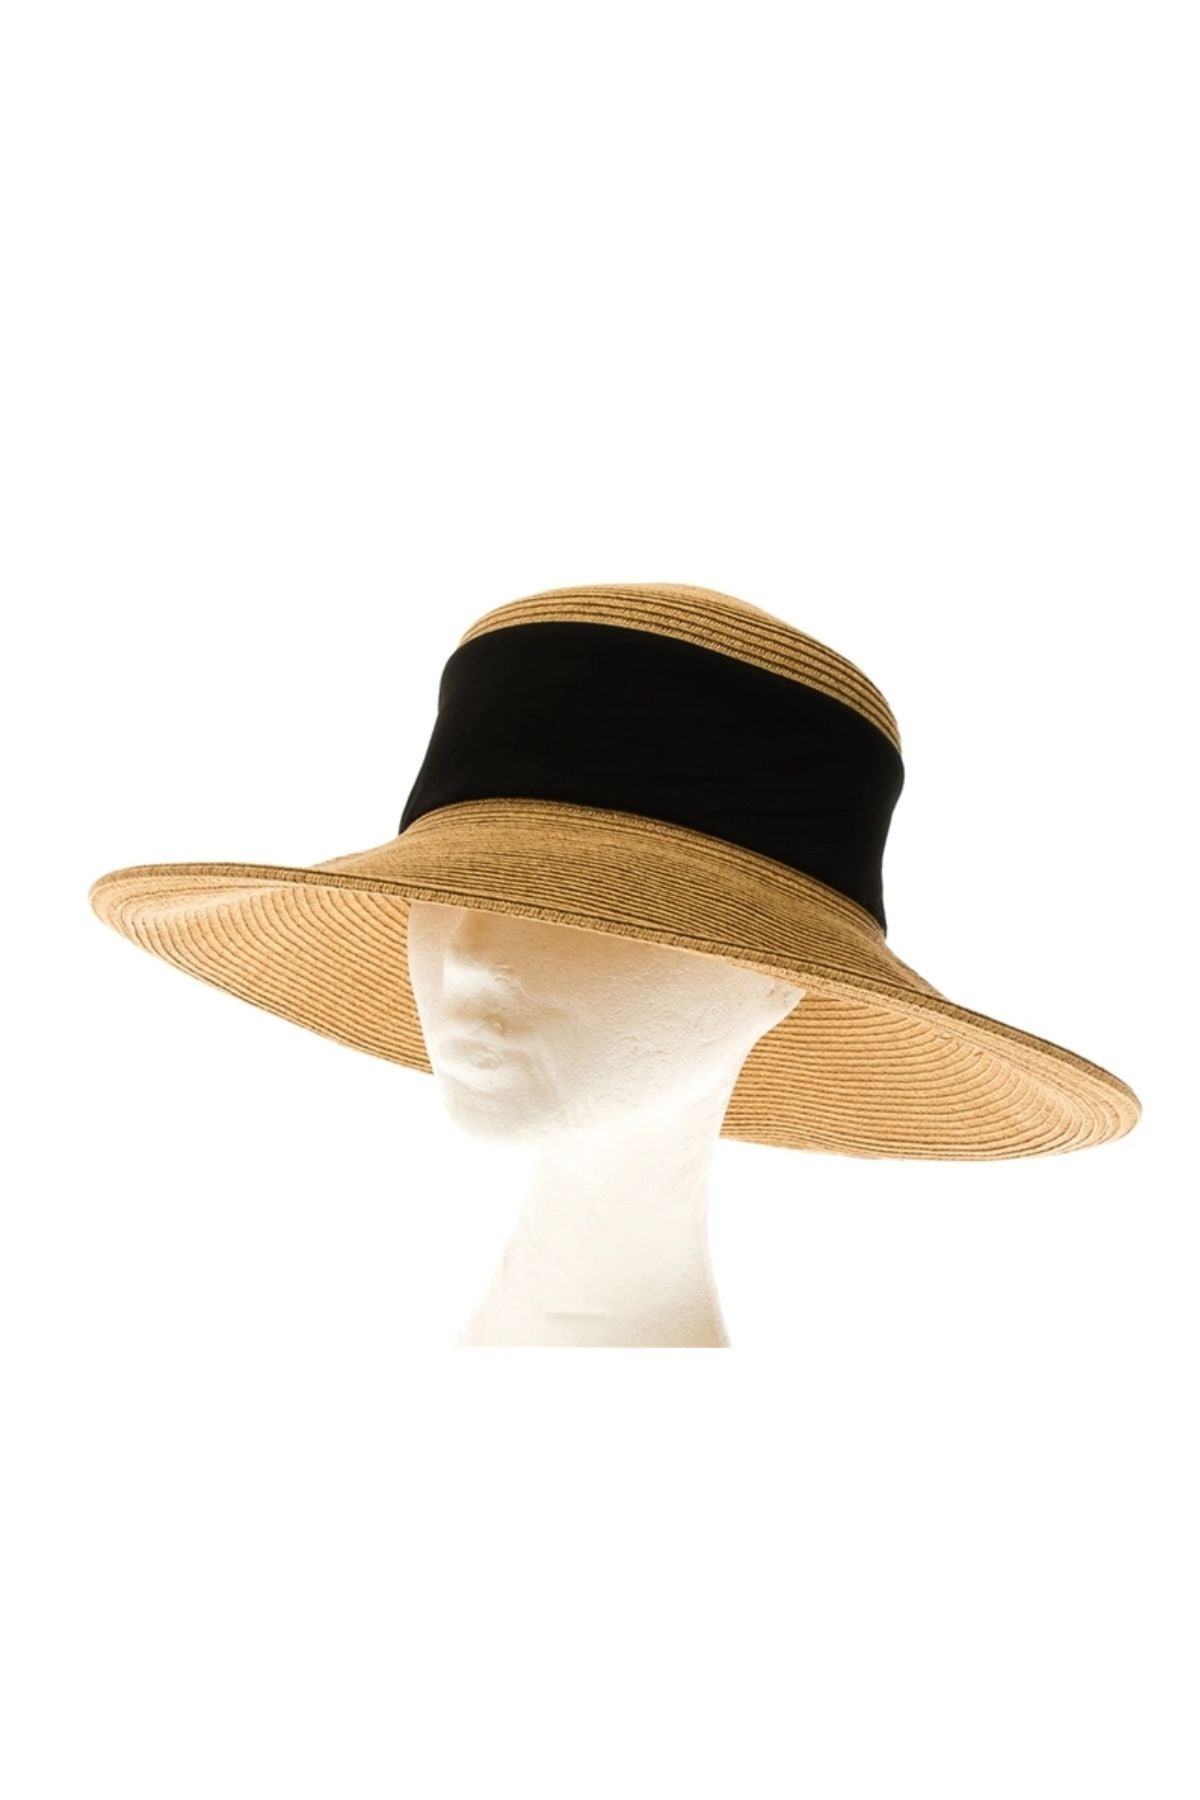 Black collapsible straw sun hat